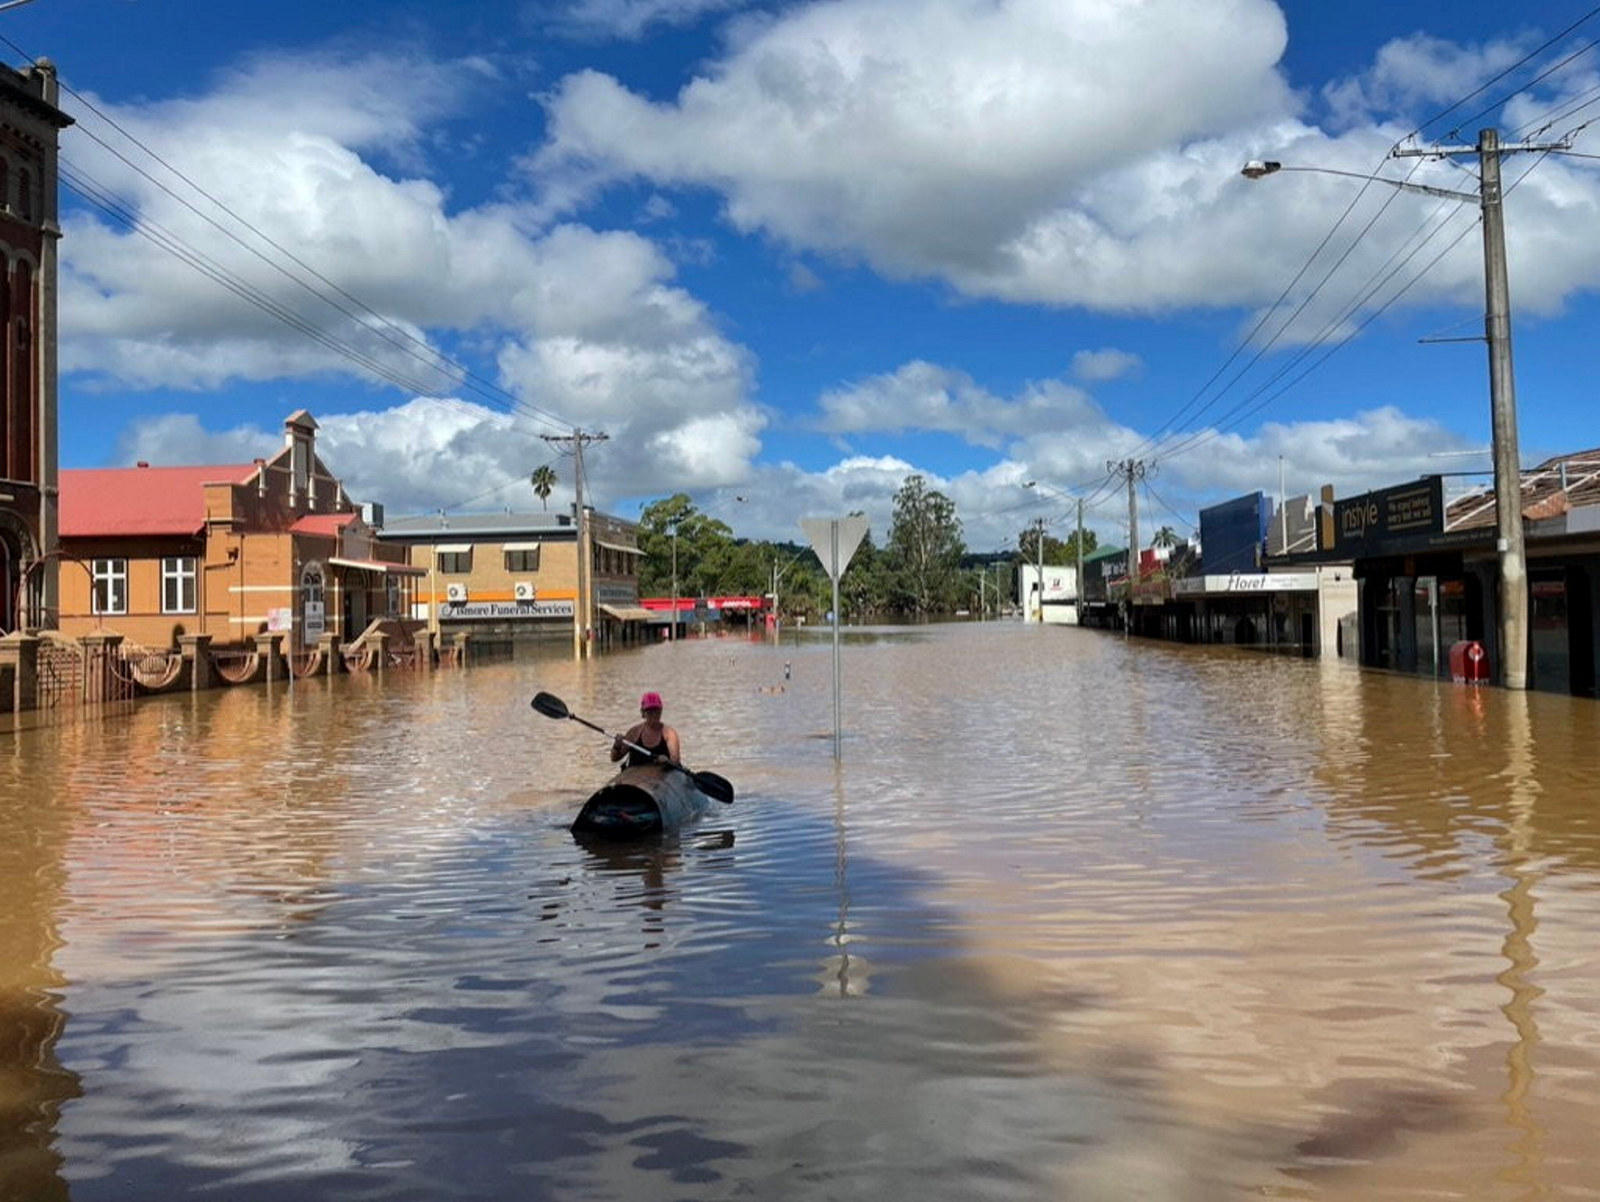 External damage caused by NSW floods in 2022 in the Lismore area (submission 0890)